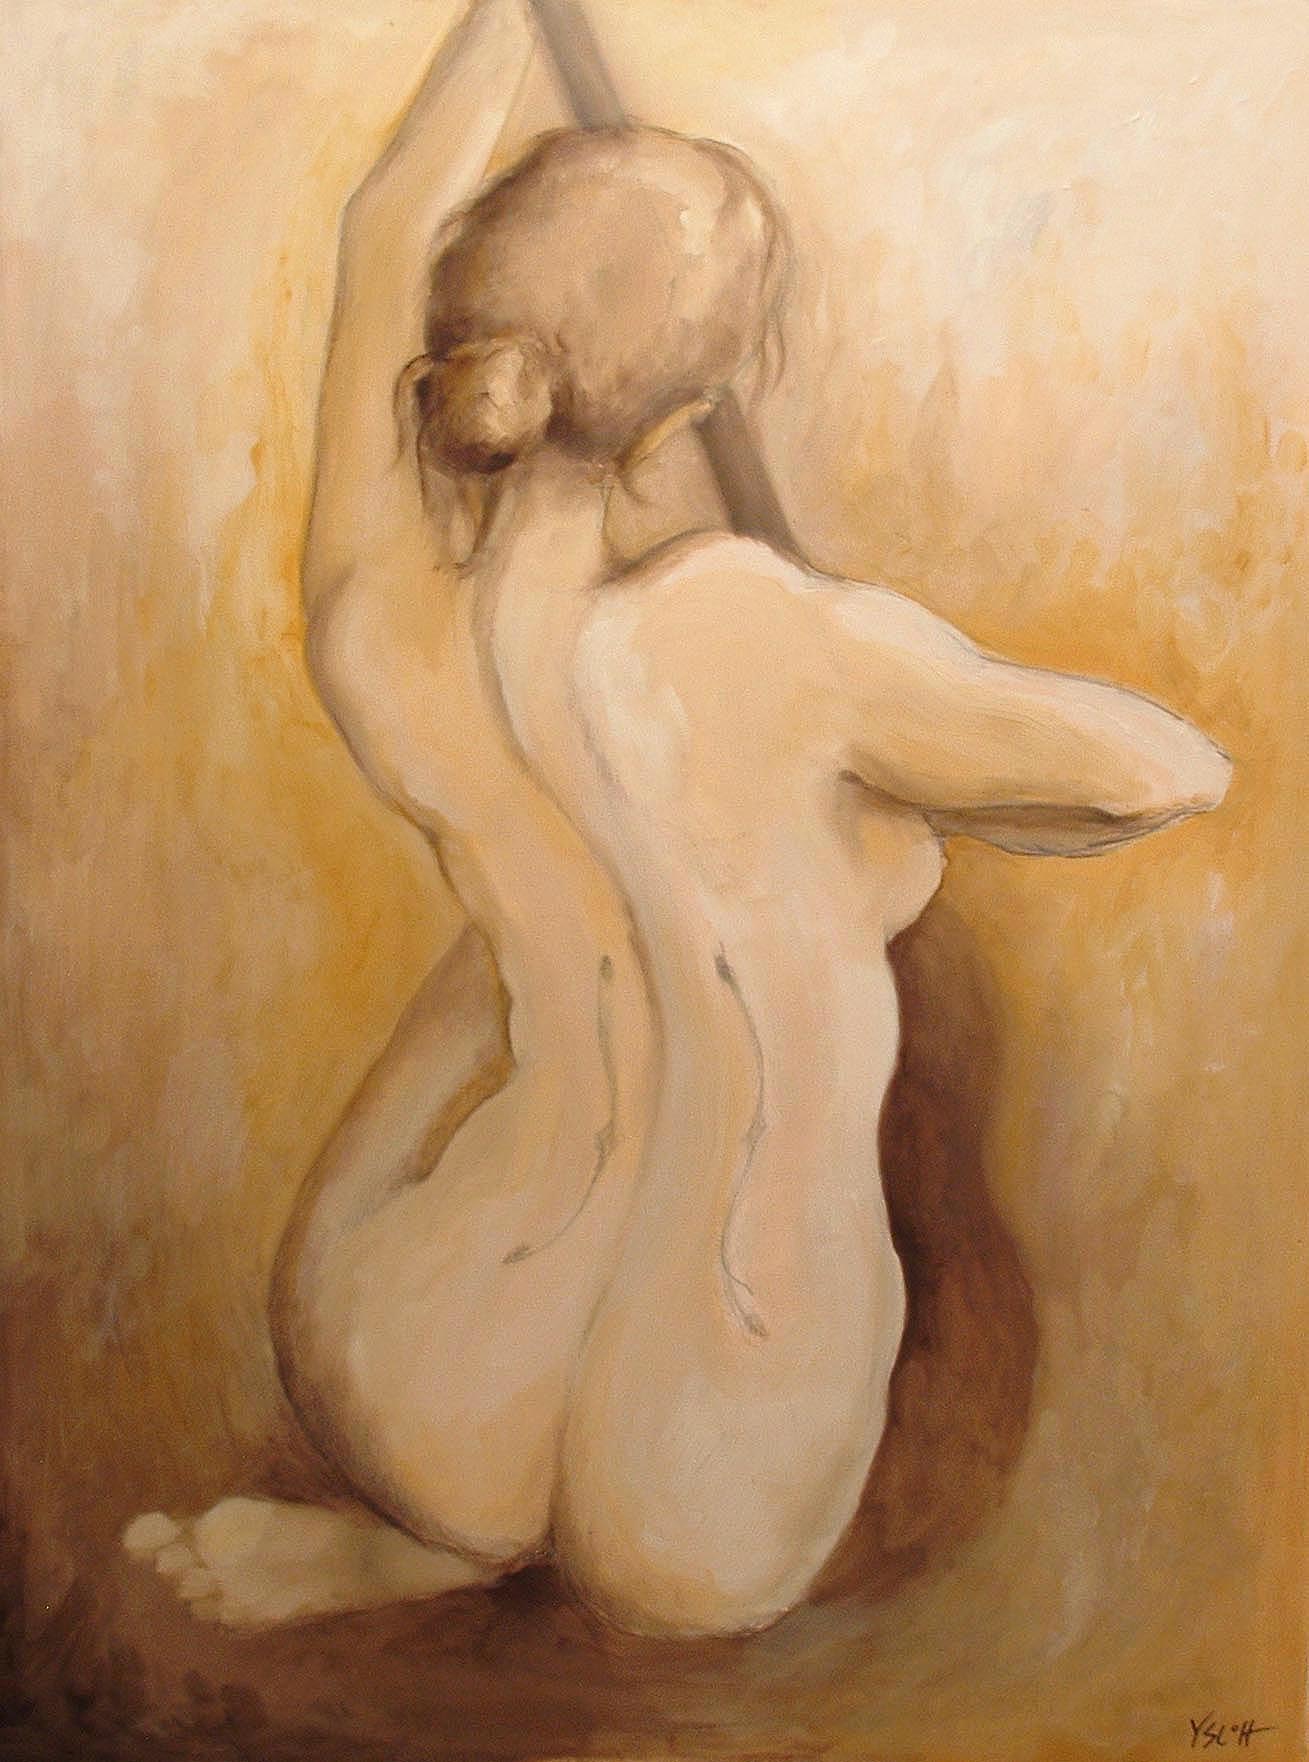   Untitled   oil on mat board, 37 x 27 &nbsp; &nbsp; Maru Perez, private collection 